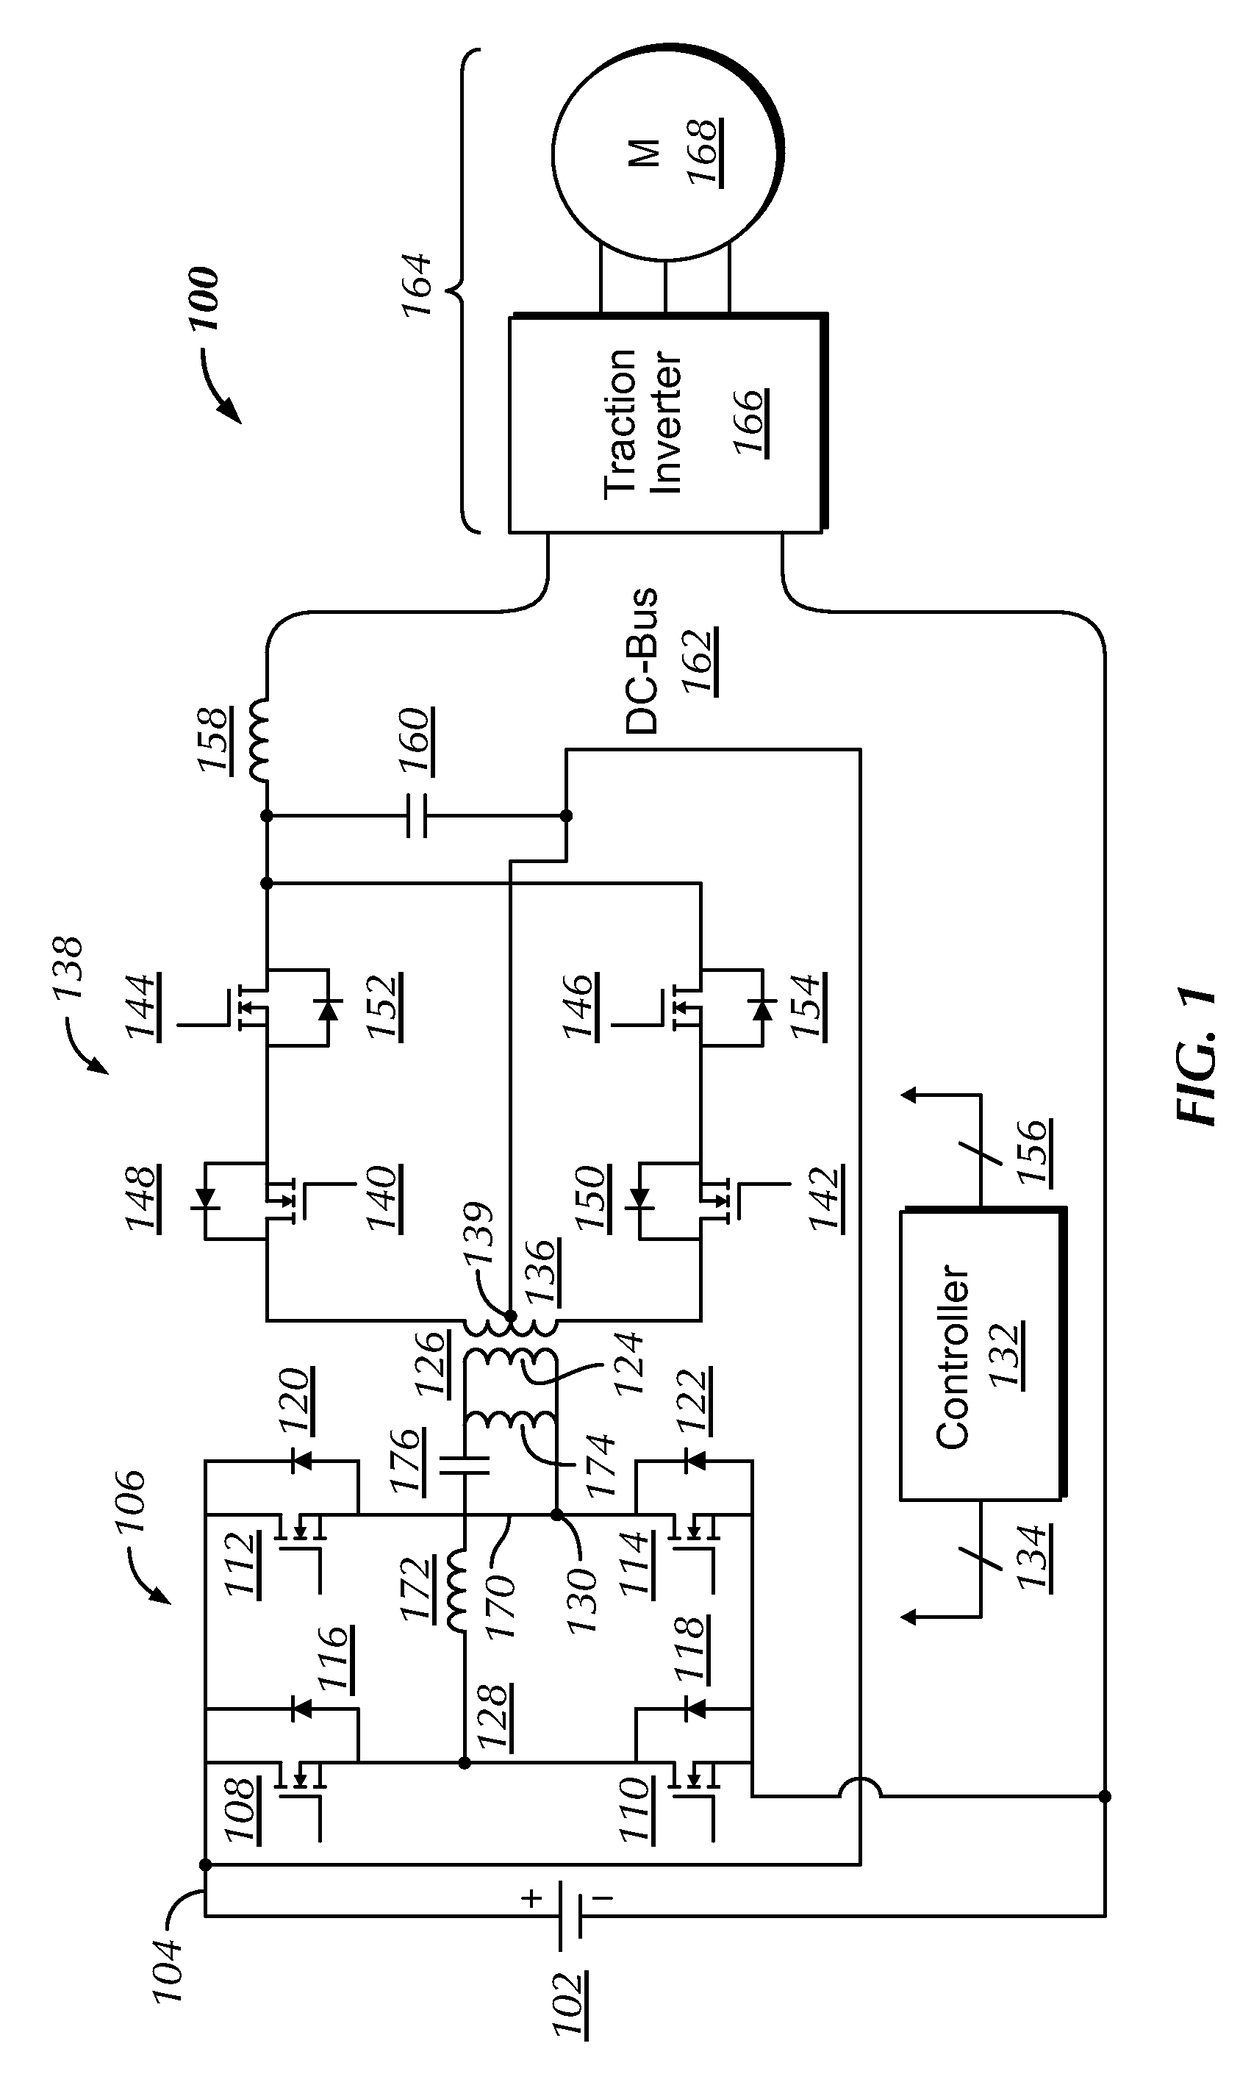 System and method for a dc/dc converter